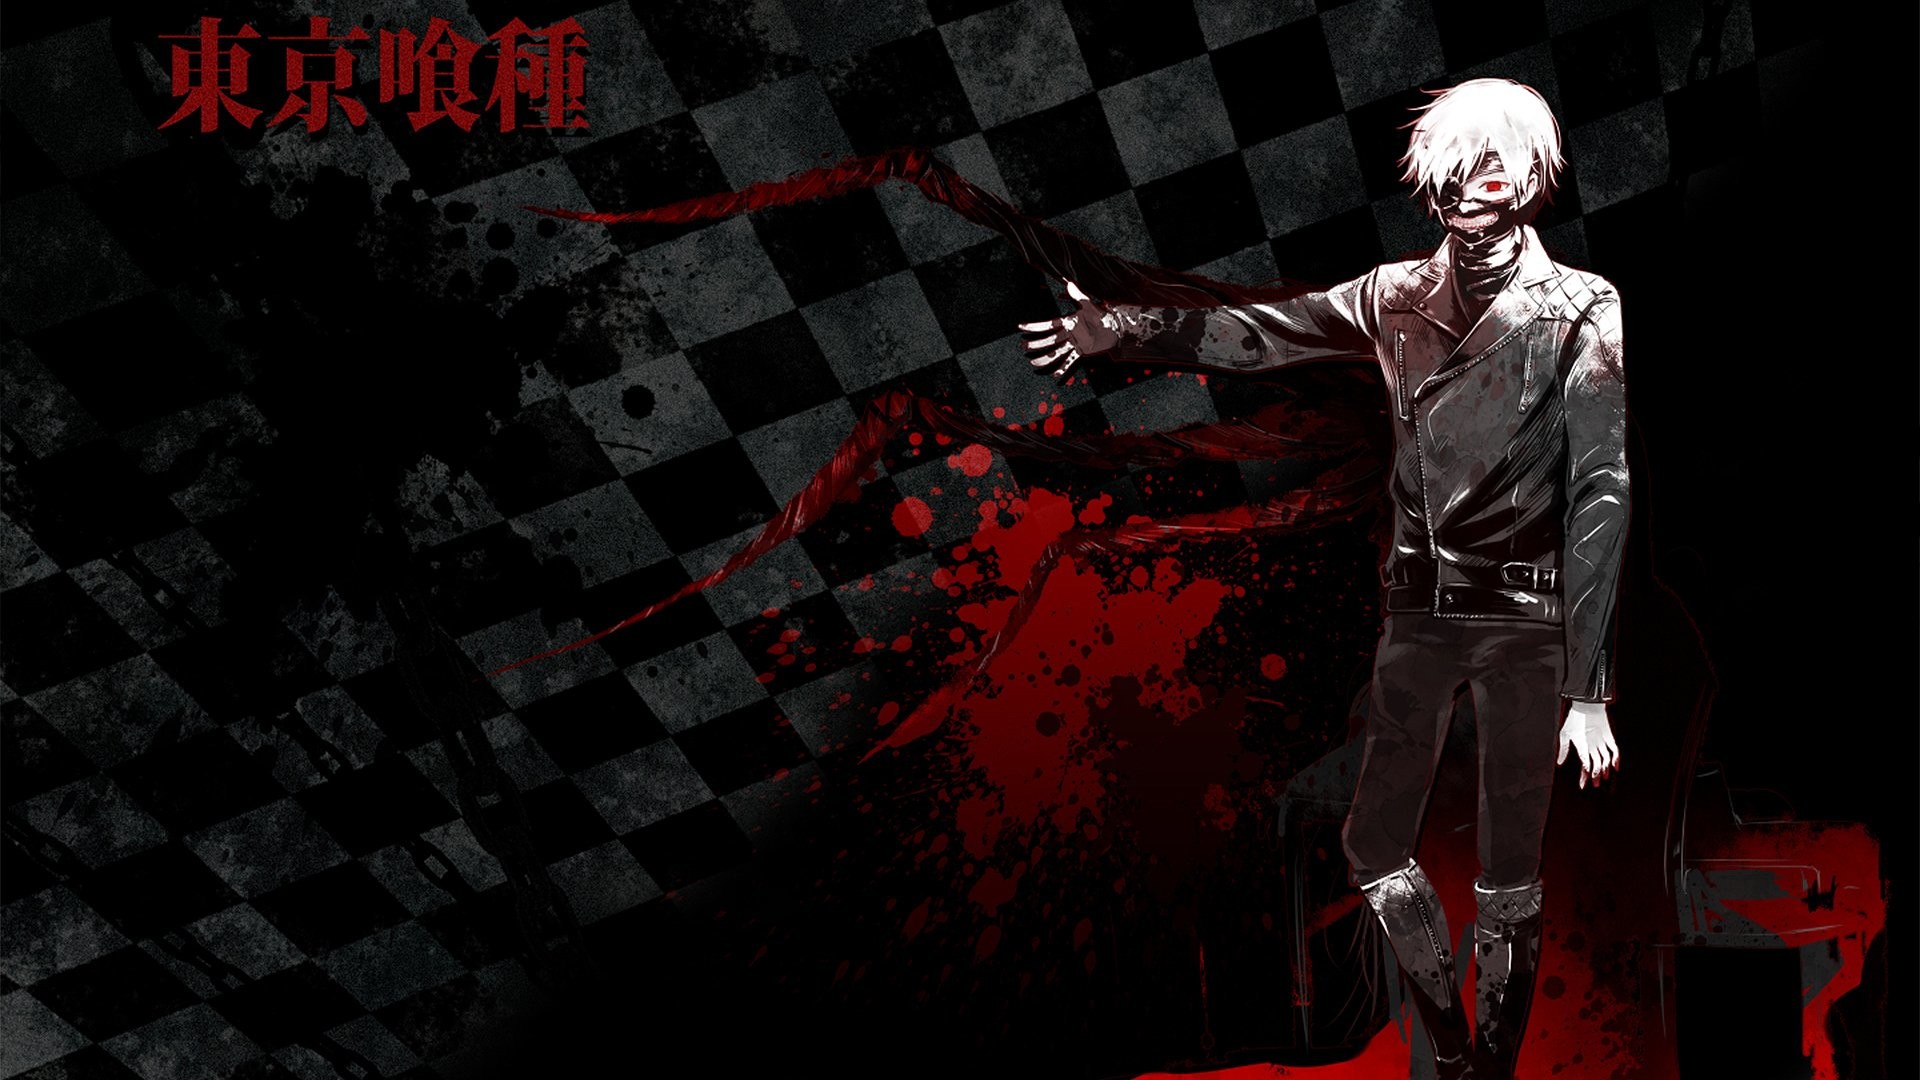 HD Wallpaper Background ID596877. Anime Tokyo Ghoul